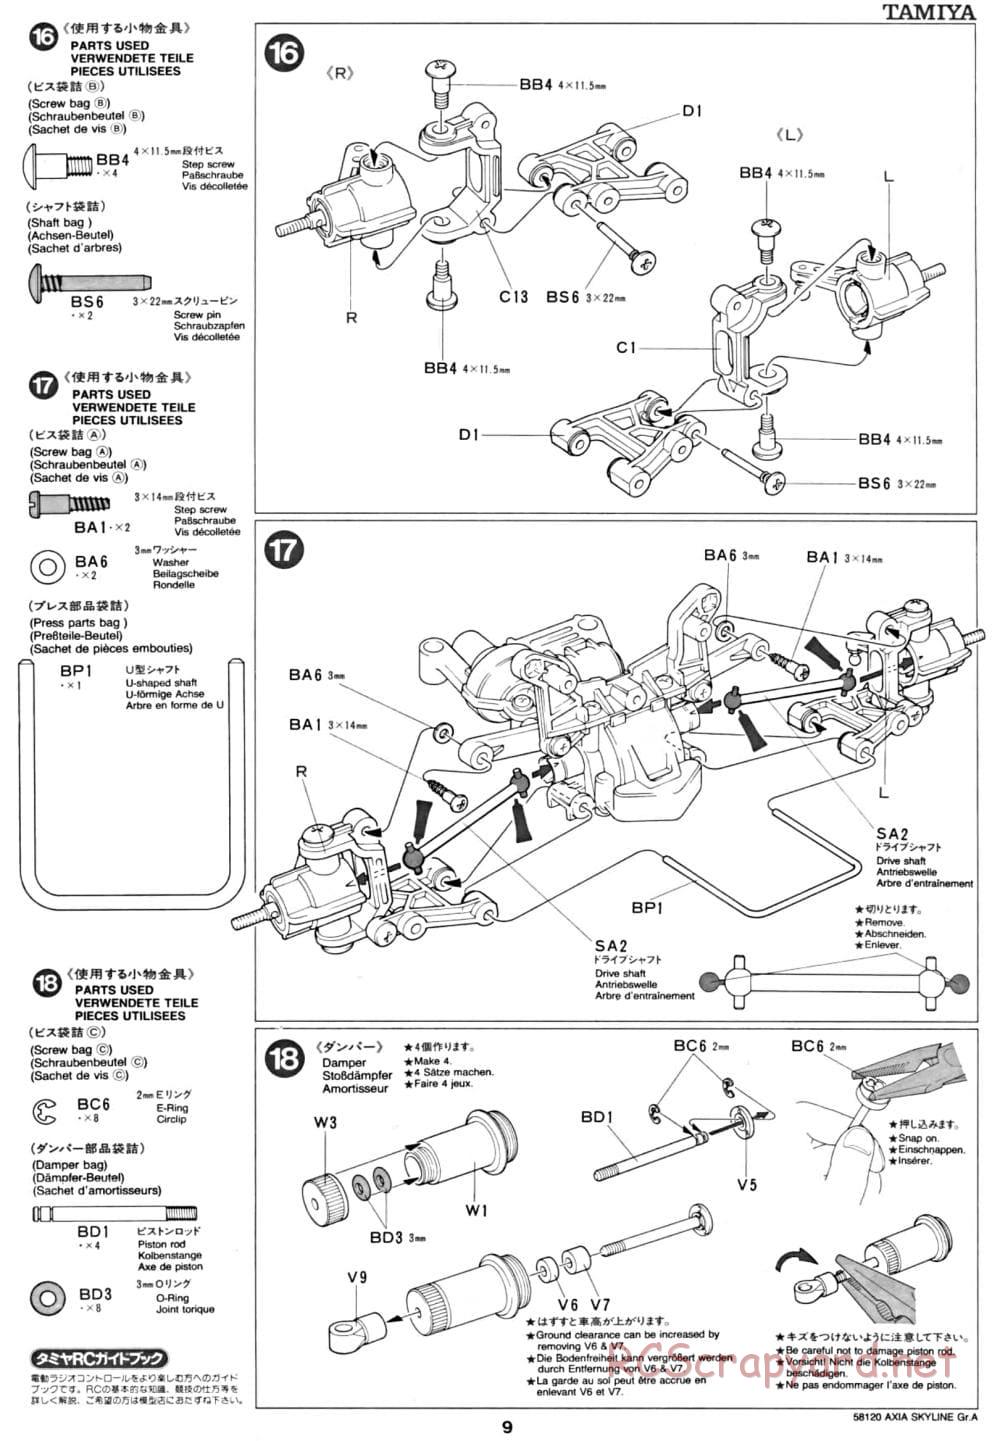 Tamiya - Axia Skyline GT-R Gr.A - TA-01 Chassis - Manual - Page 9